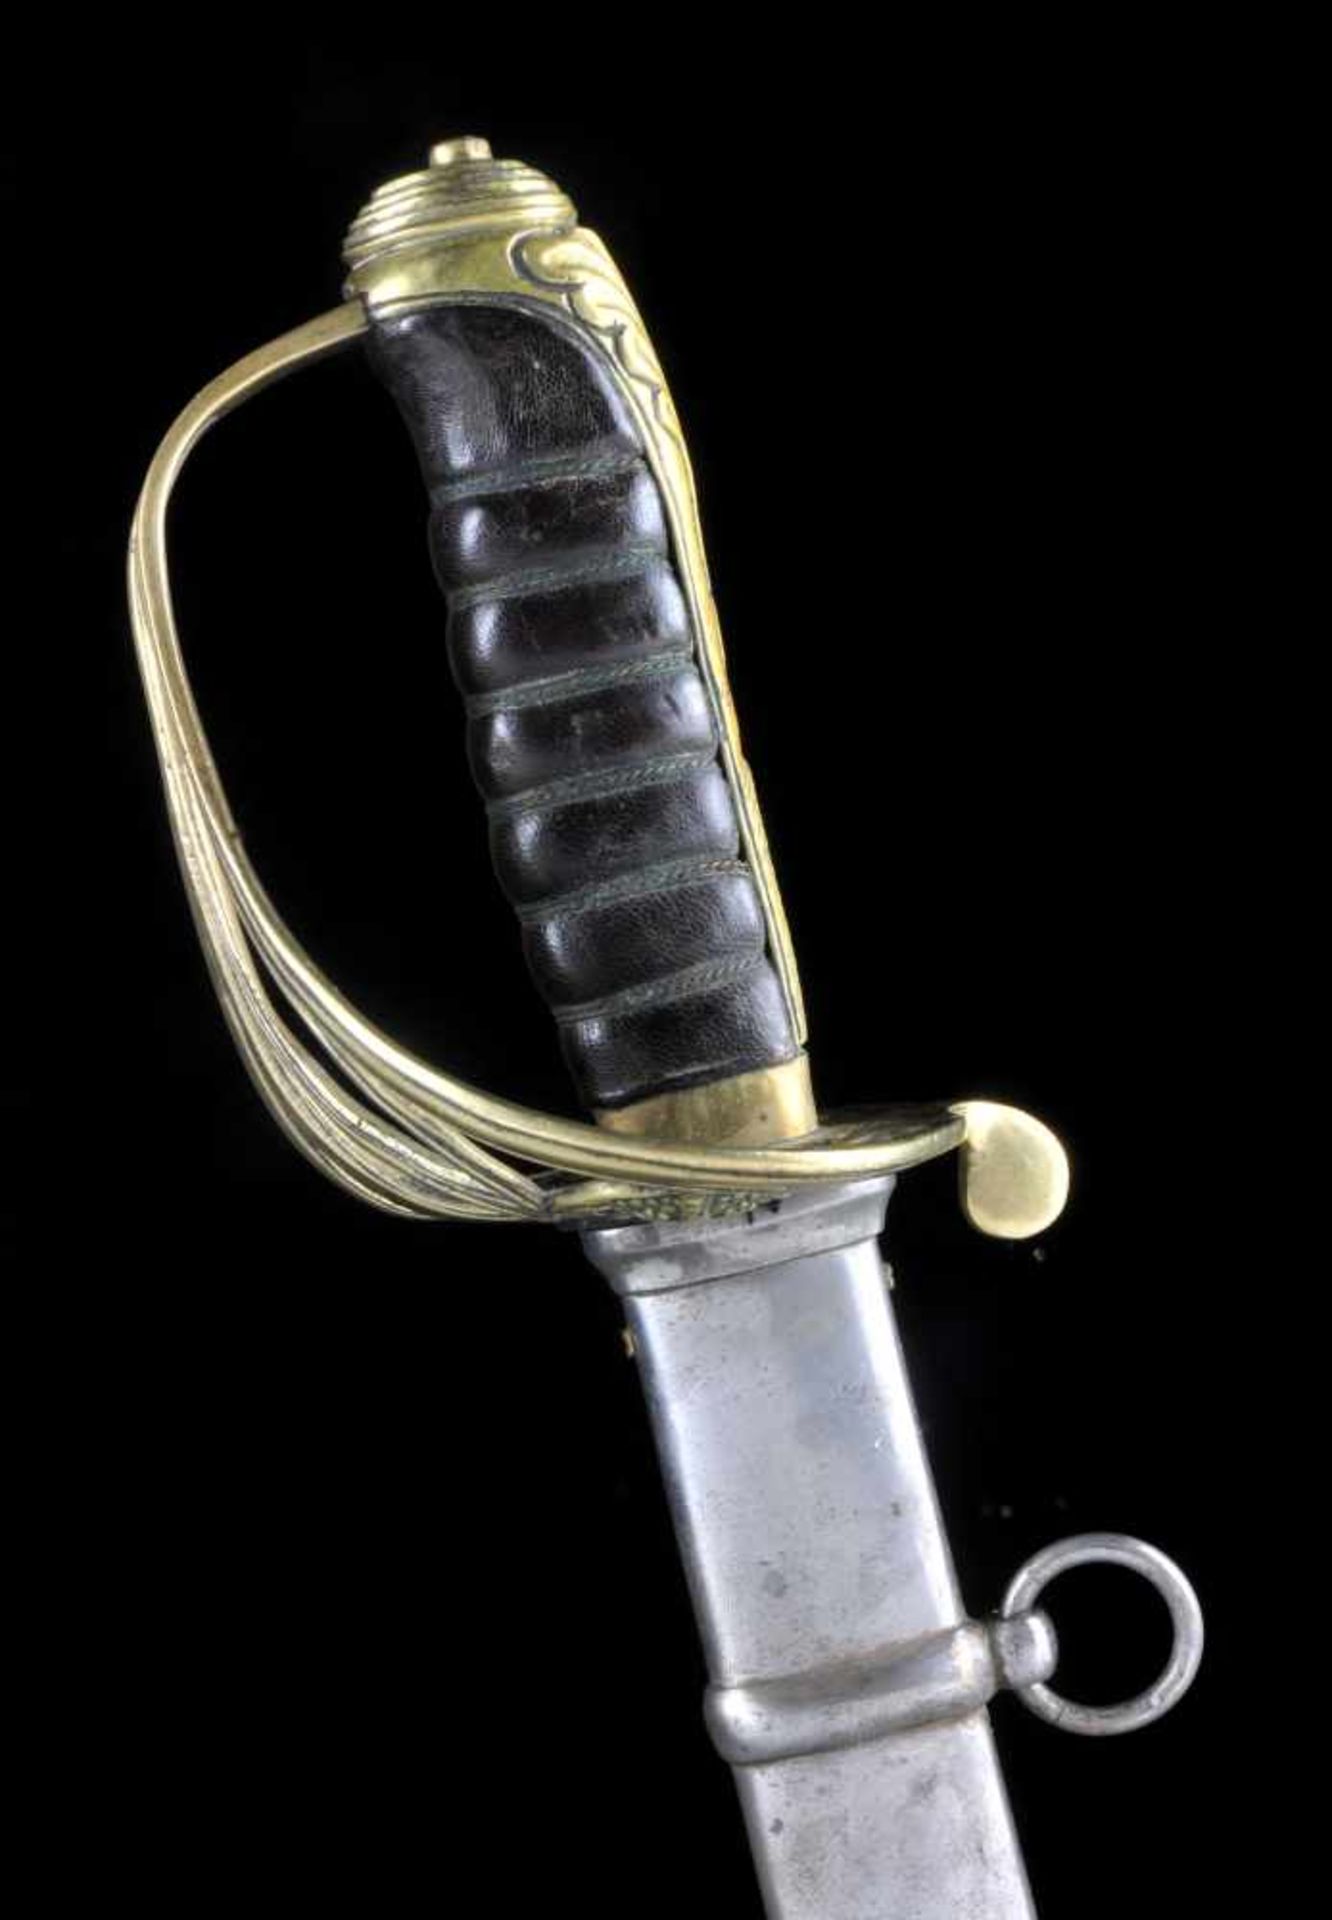 A BRITISH 1845 PATTERN INFANTRY OFFICER’S SWORD WITH ETCHED BLADE, VICTORIAN PERIOD. Origin: